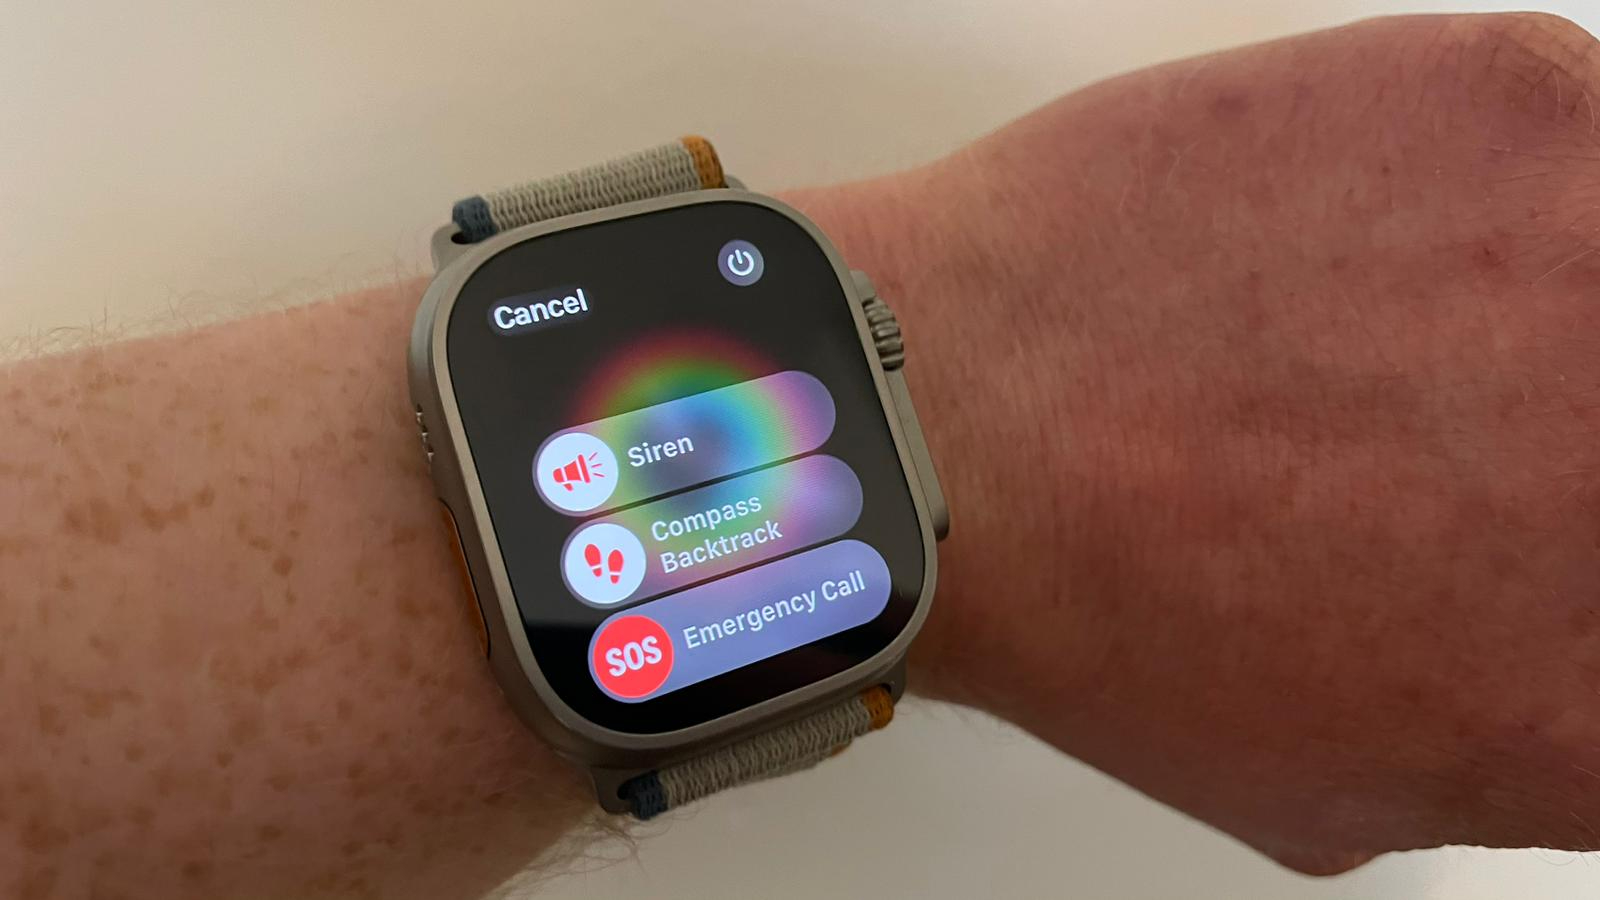 The sliders displayed on the Apple Watch Ultra 2 after you hold the side or action buttons